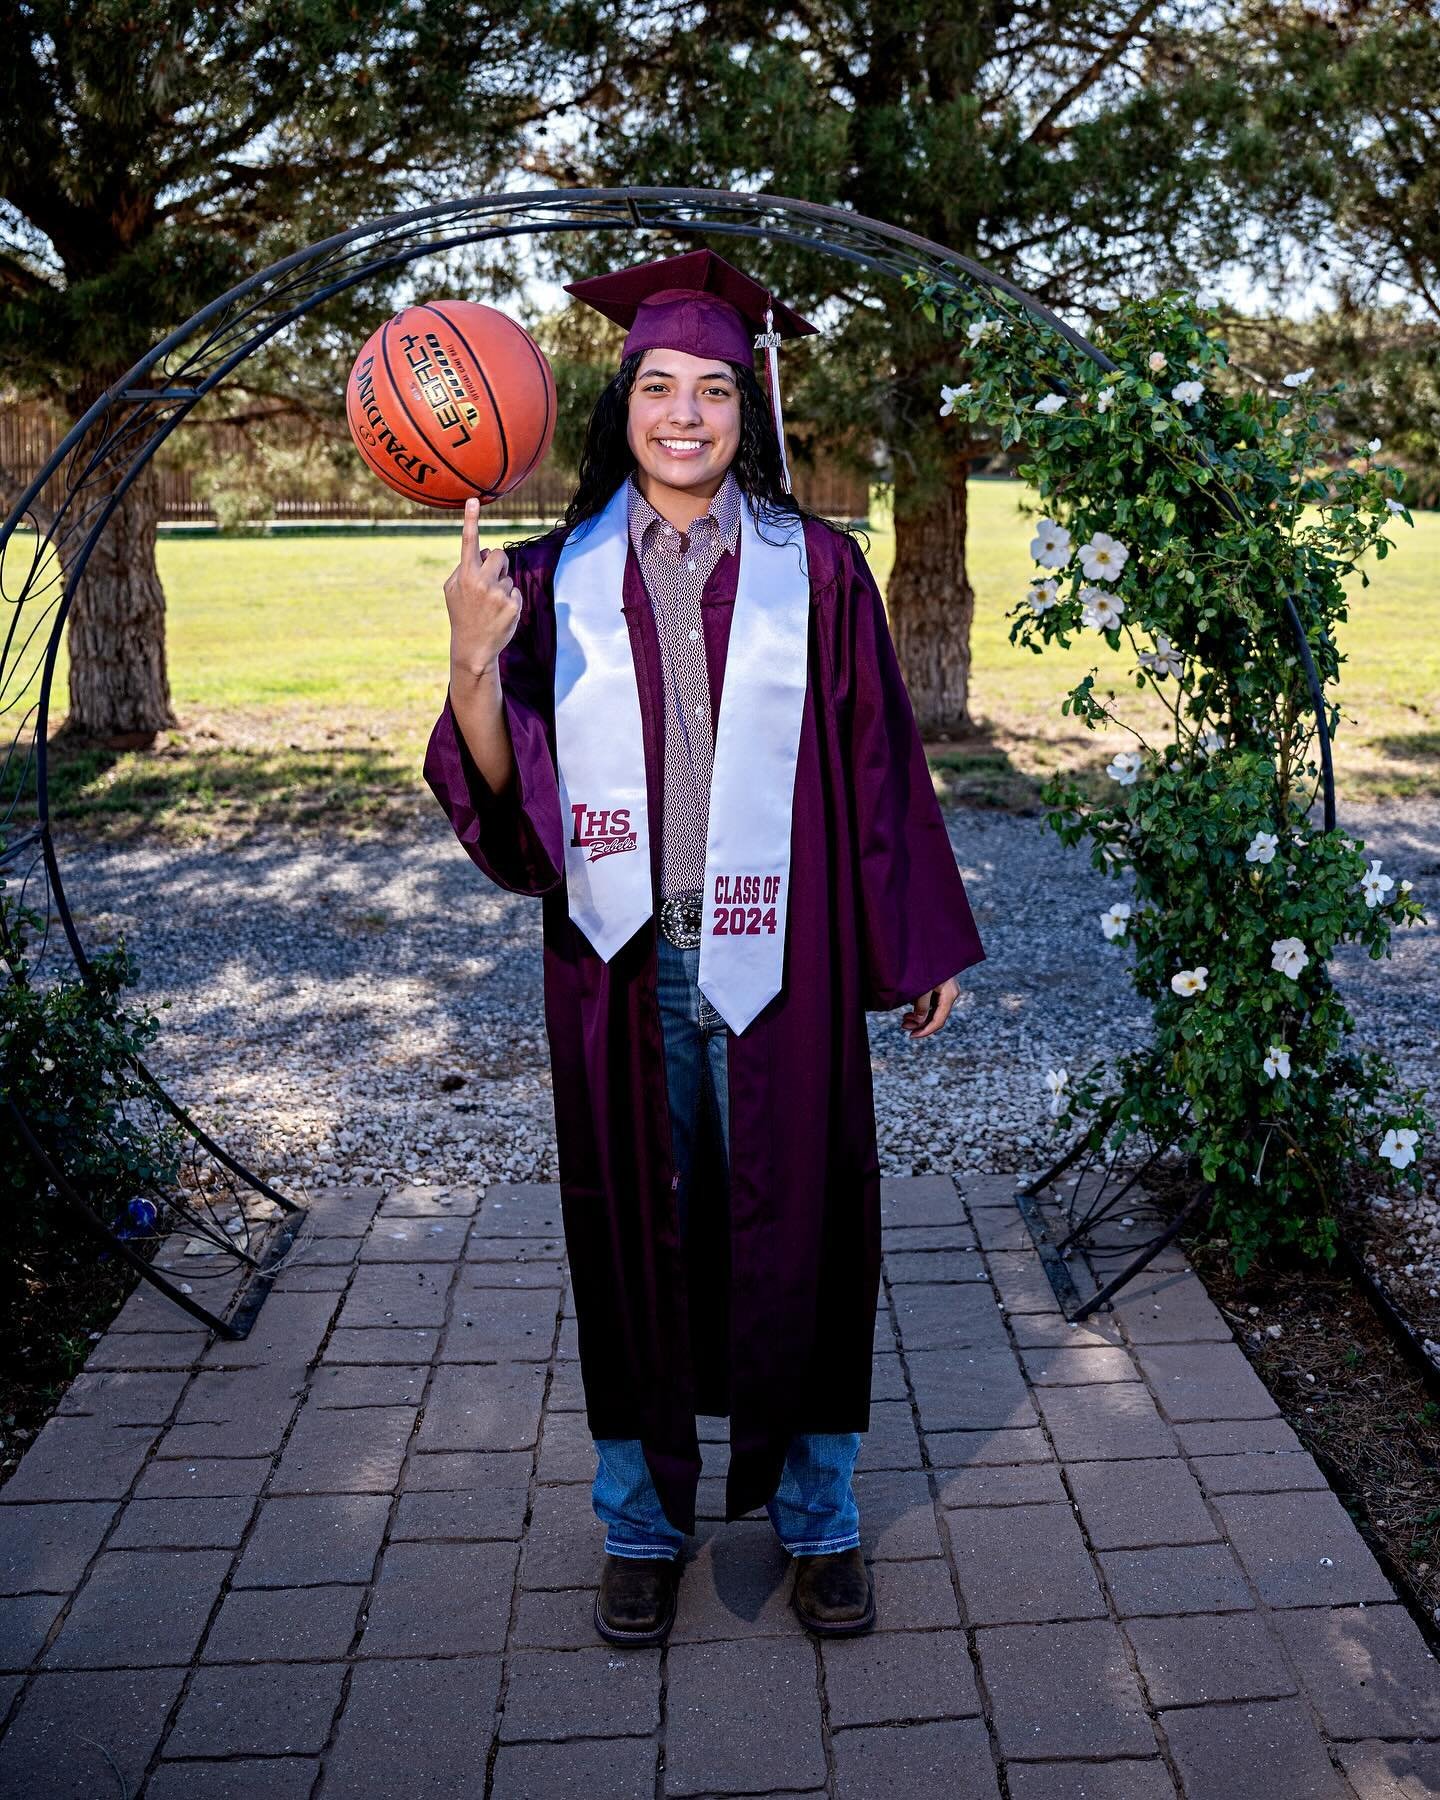 It&rsquo;s been so cool to get to know Natalie and her mom this year.  Western New Mexico basketball is blessed to have Natalie joining the team! 
.
.
.
#basketball #westernnewmexicouniversity #capandgown #graduation #classof2024 #shineon